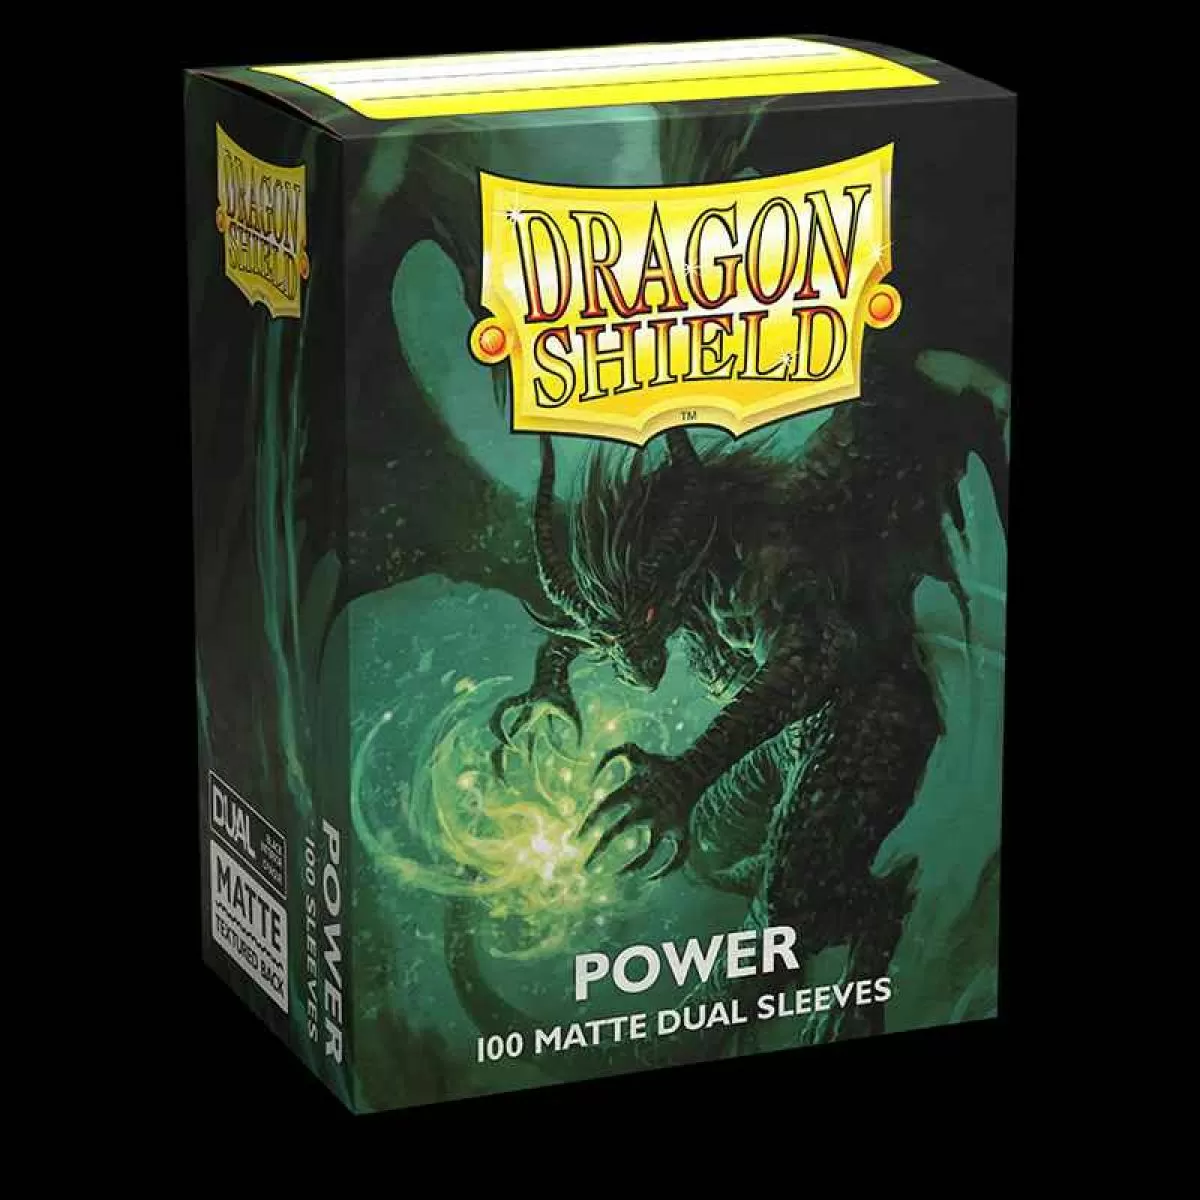 Dragon Shield - Perfect Fit Card Sleeves Assorted (Pack of 100) - See – The  Game Tree NZ